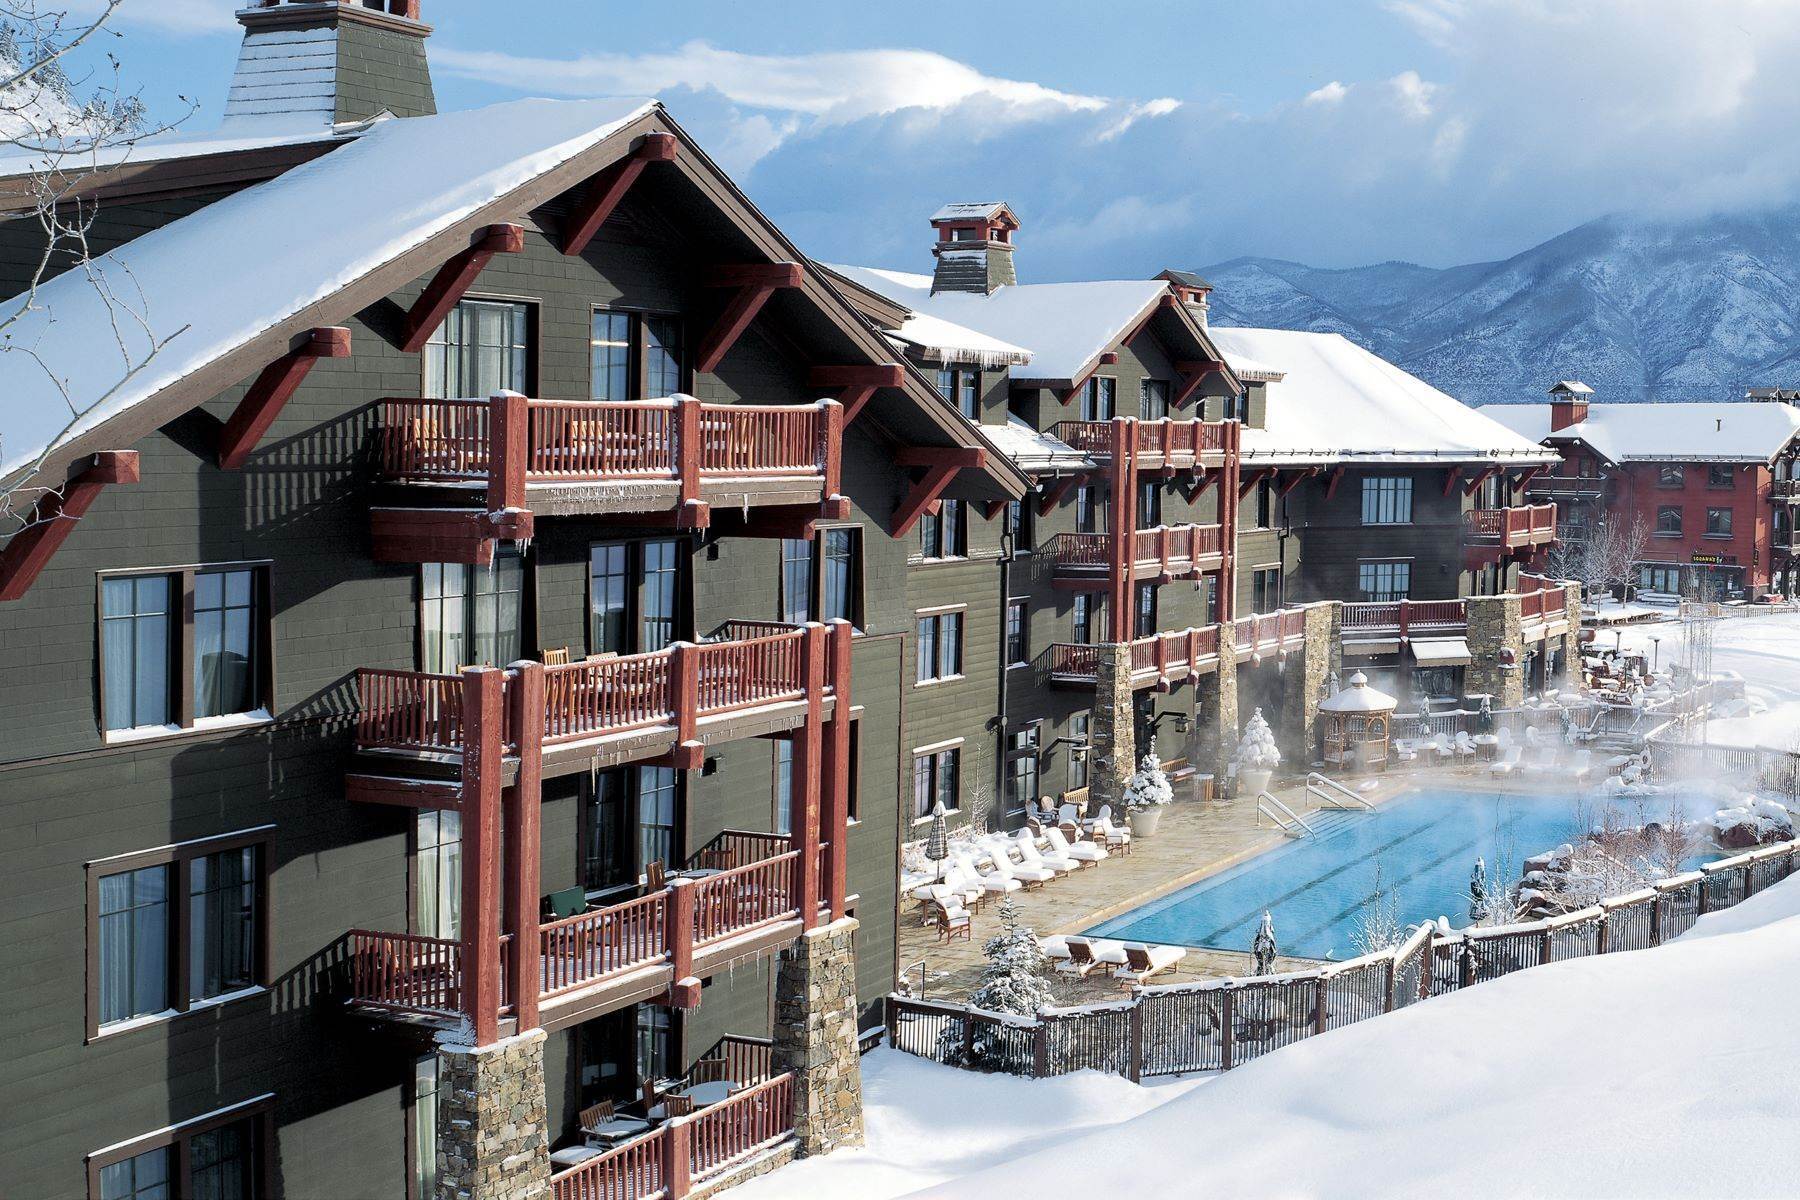 Fractional Ownership Property for Sale at 3 Bedroom Ritz Carlton Club - Summer Interest #12 0039 Boomerang Road, Unit 8214 Summer Interest 12 Aspen, Colorado 81611 United States